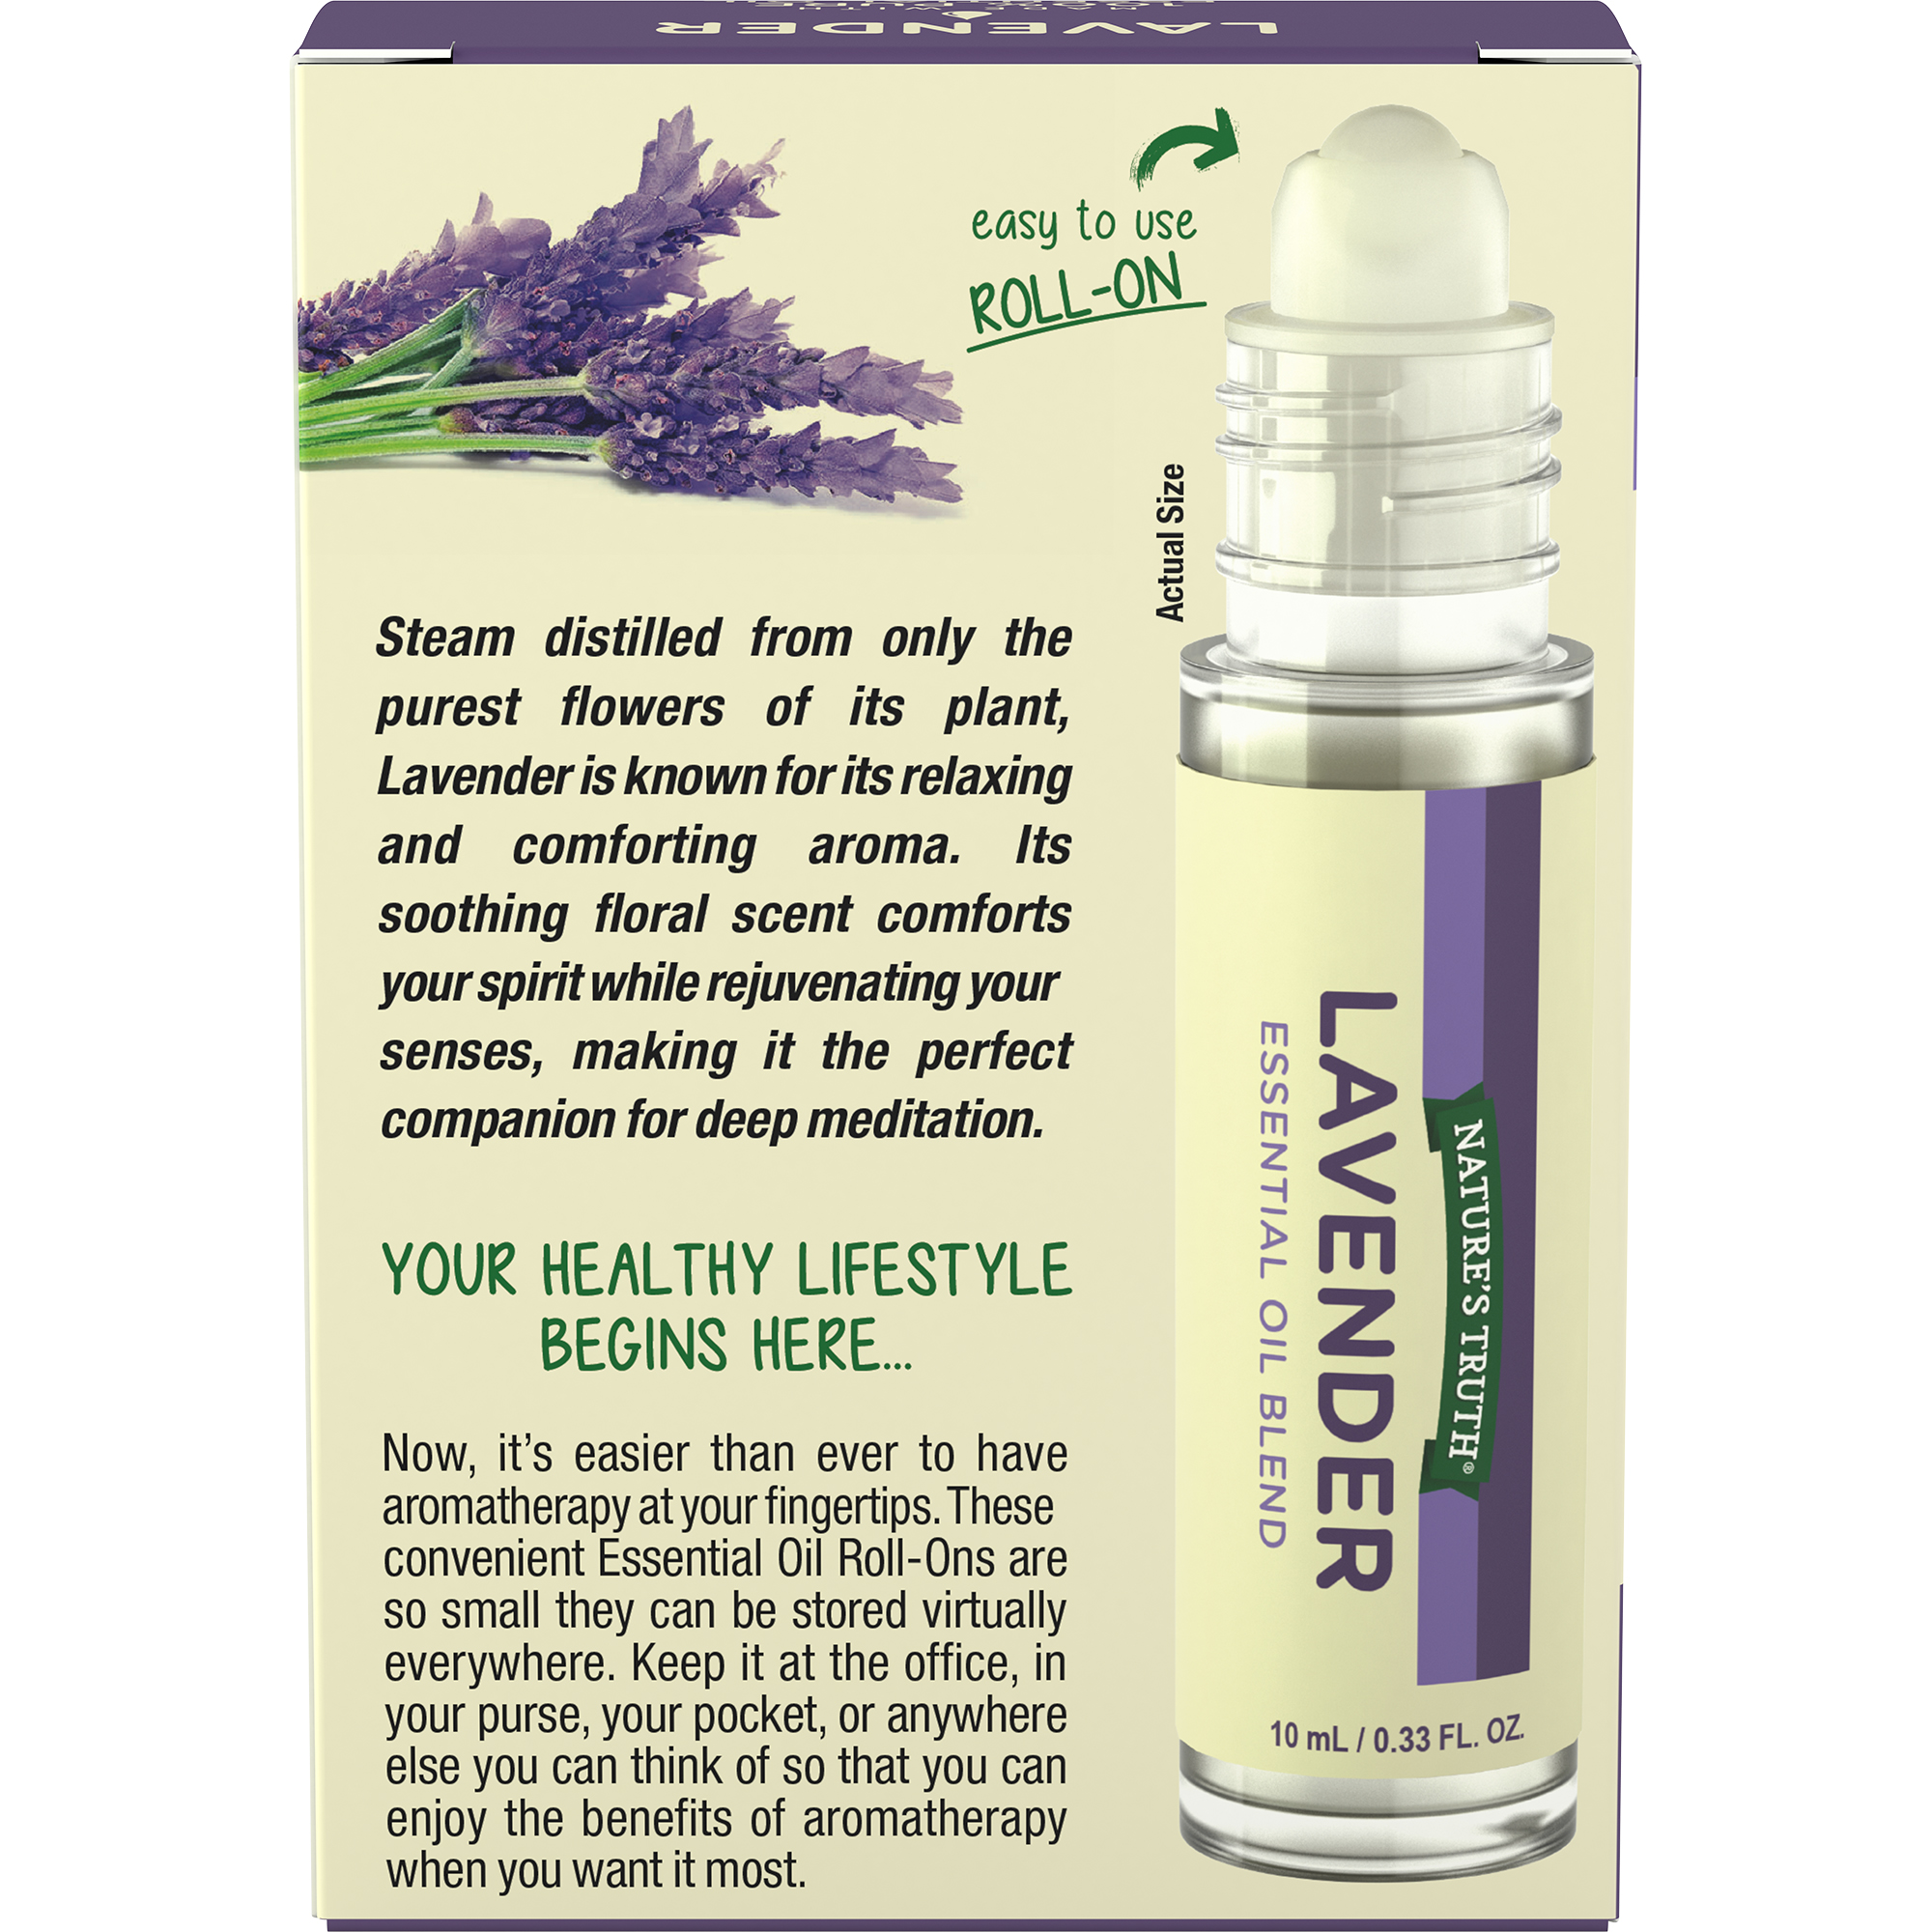 Lavender Essential Oil Roll On | Soothing Blend | 10 mL | GC/MS Tested | By Nature's Truth - image 2 of 4